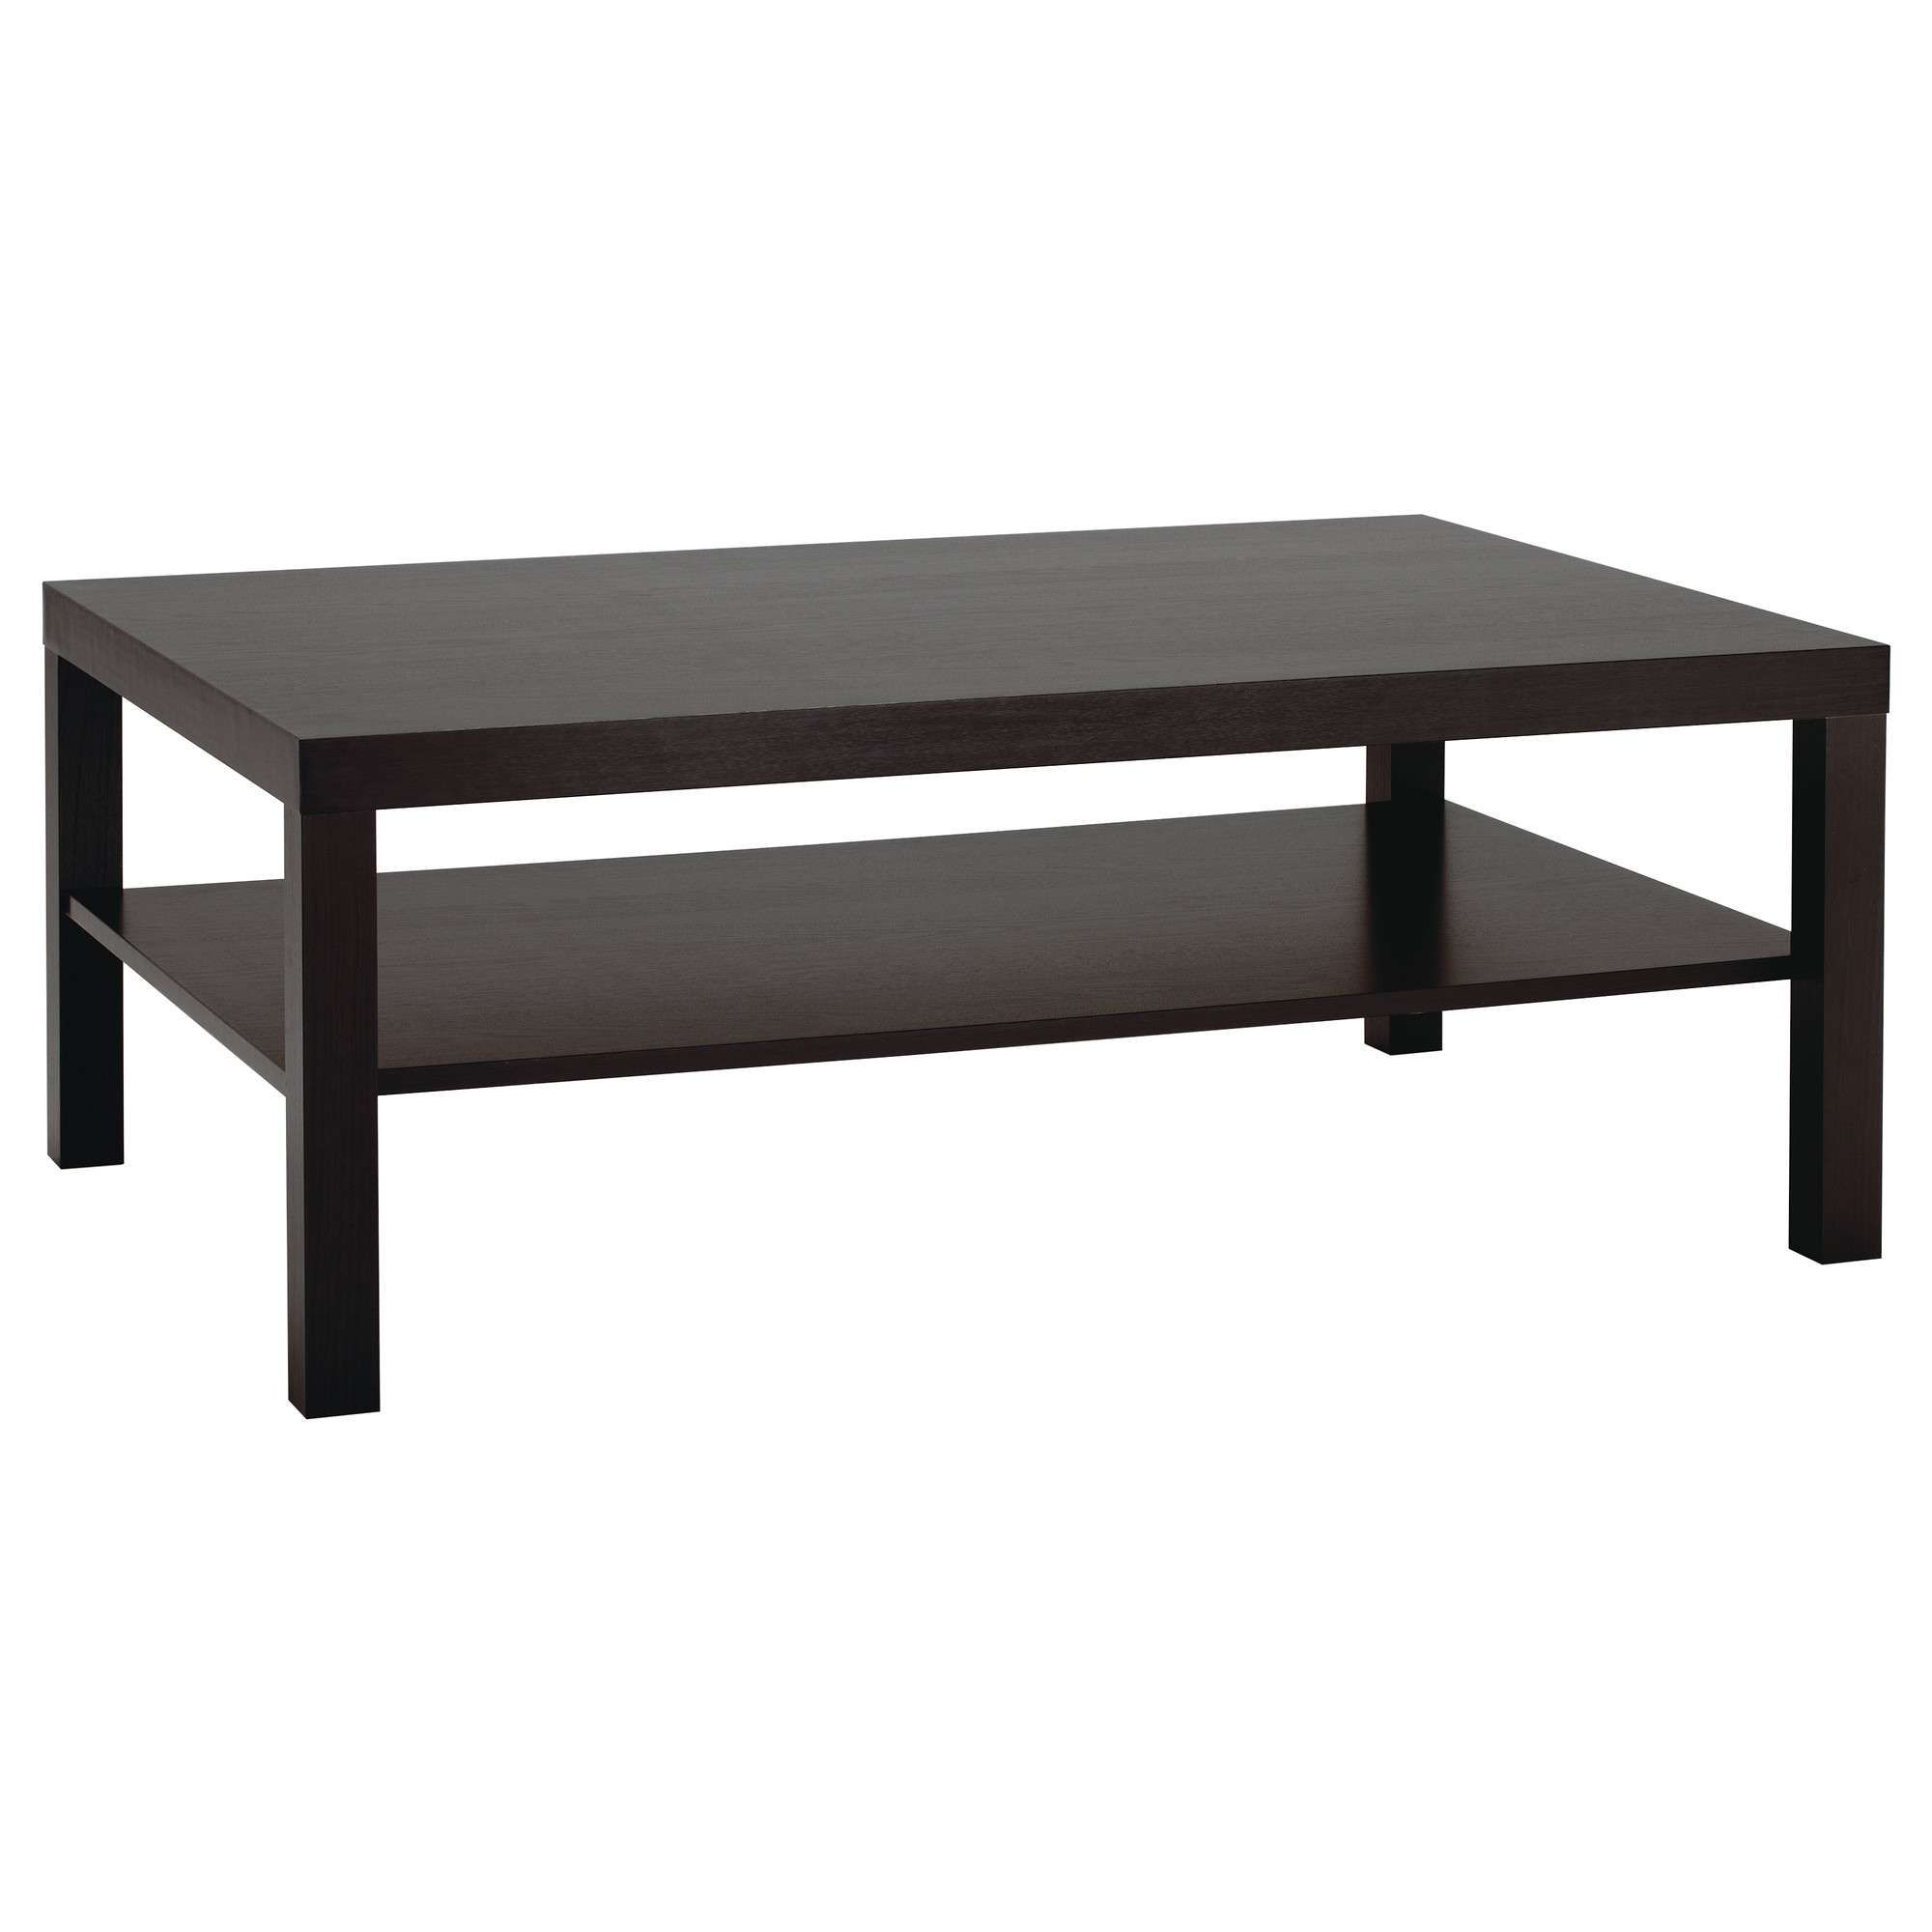 Most Up To Date Rectangular Coffee Tables Pertaining To Lack Coffee Table – Black Brown – Ikea (View 15 of 20)